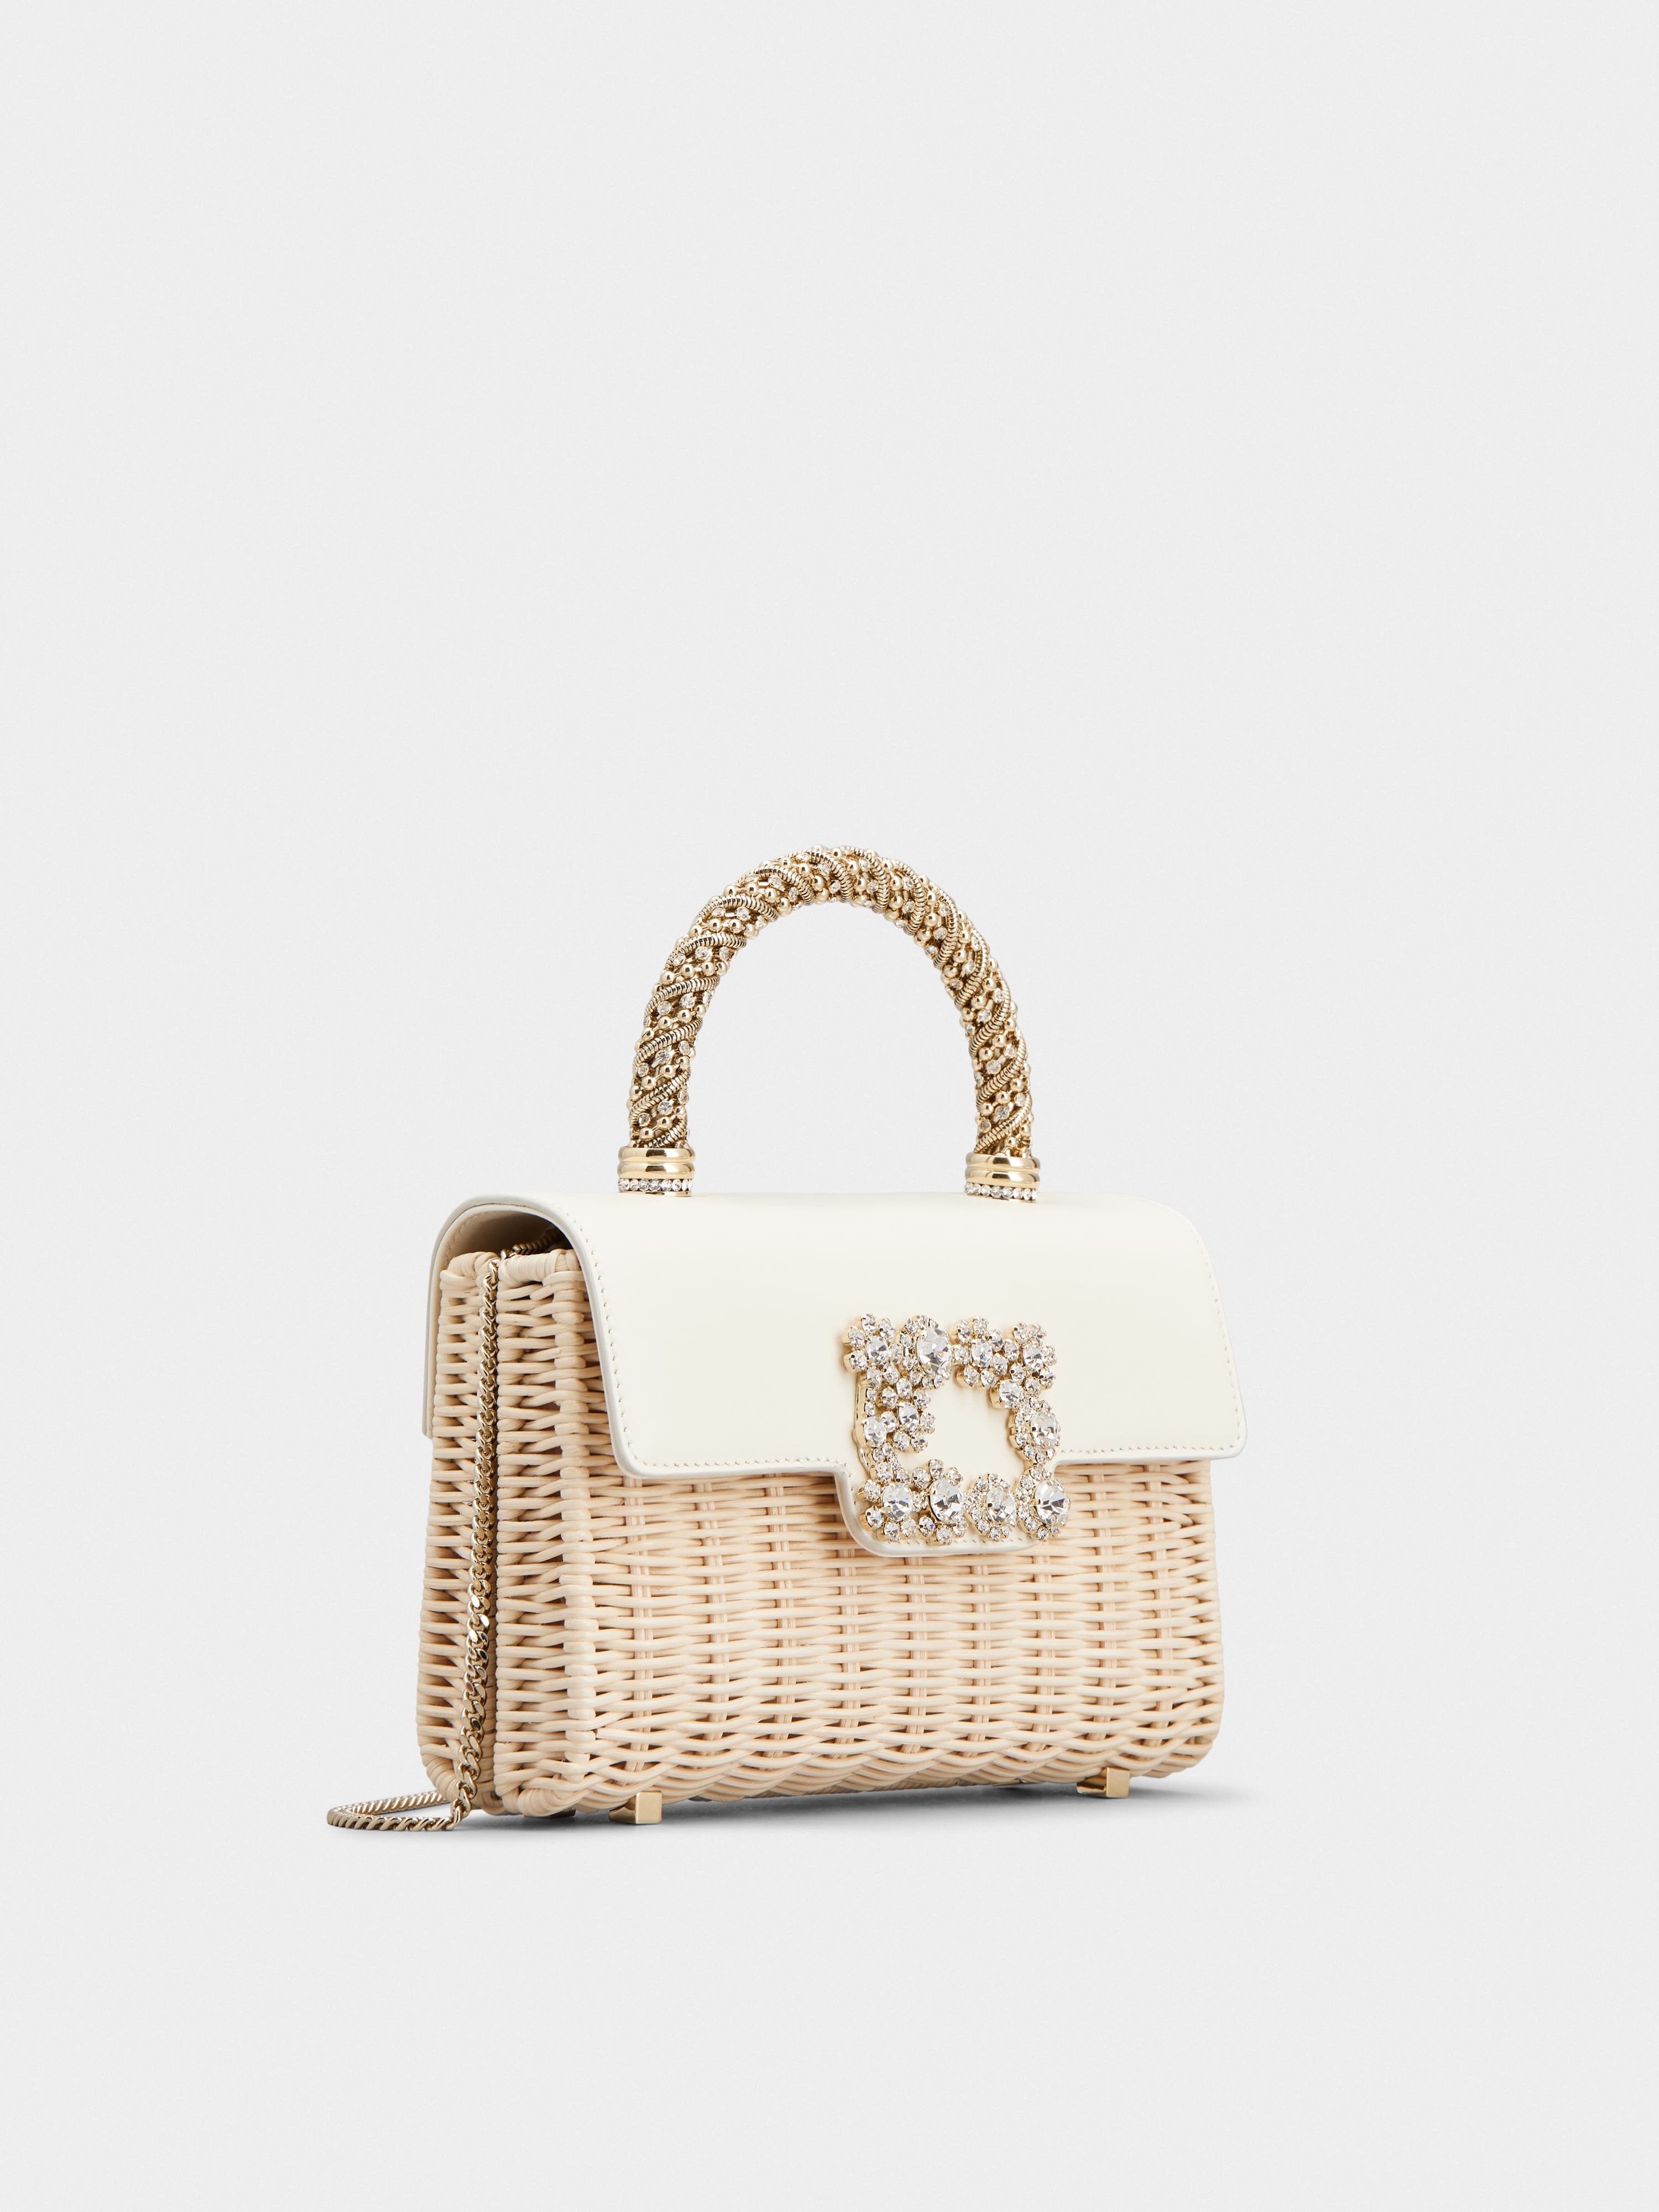 Wicker Jewel Mini Flower Strass Buckle Clutch Bag in Leather and Rattan - 3